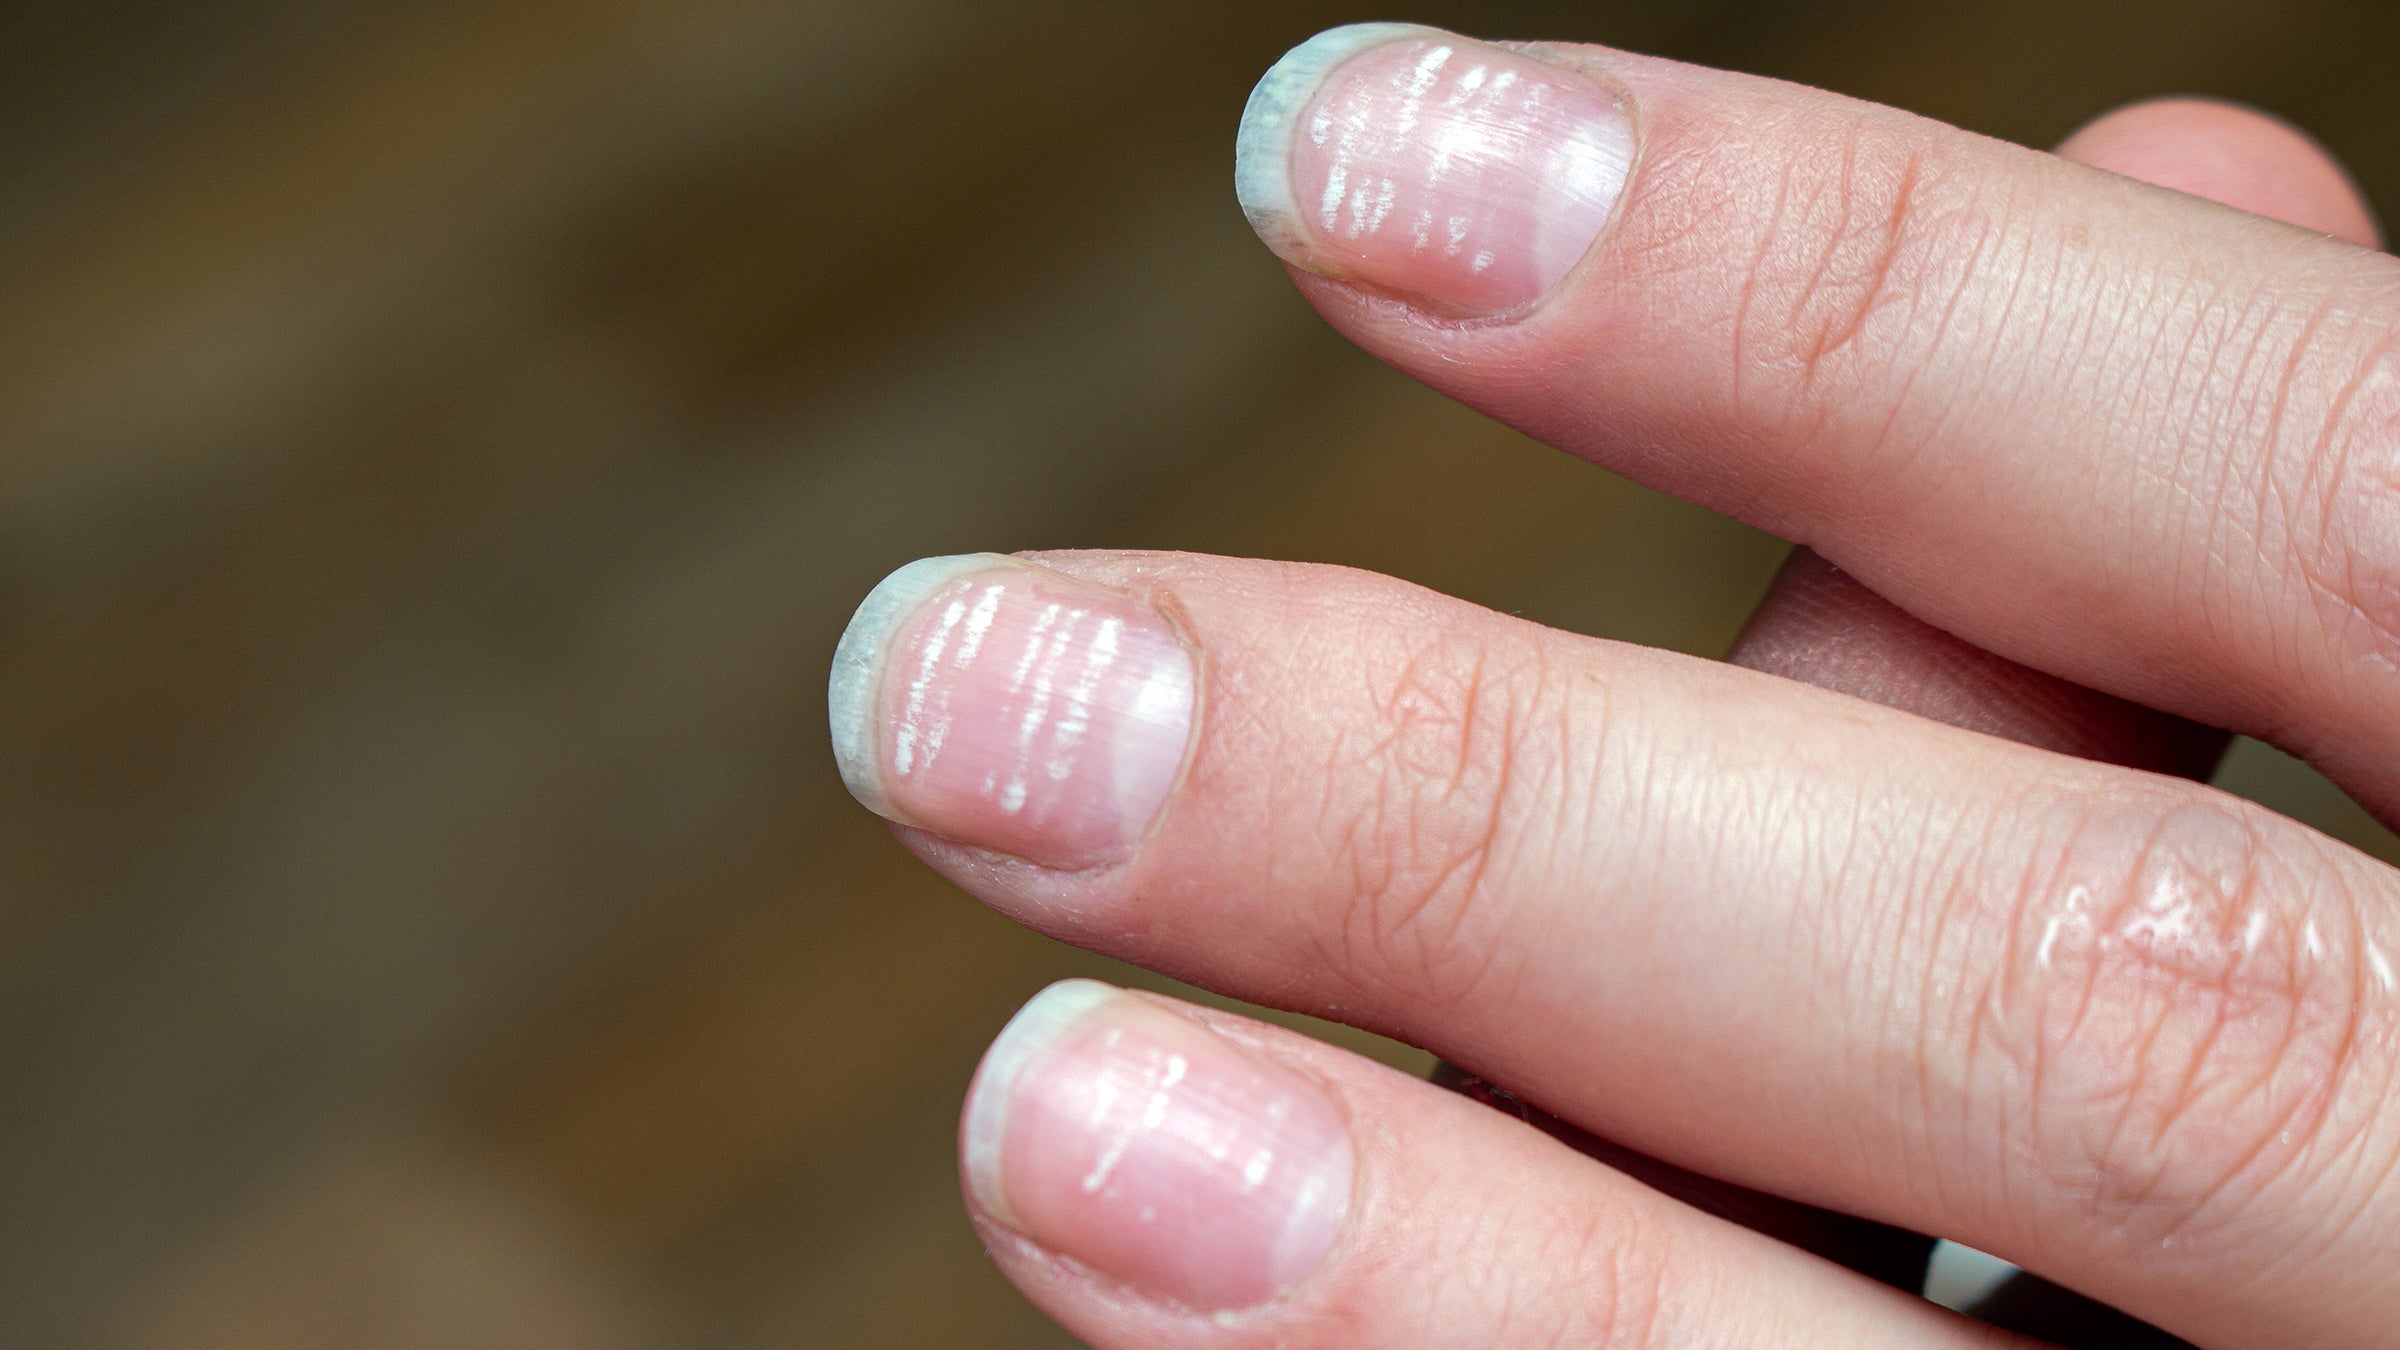 White Spots on Your Child's Nail - Should You Be Worried?